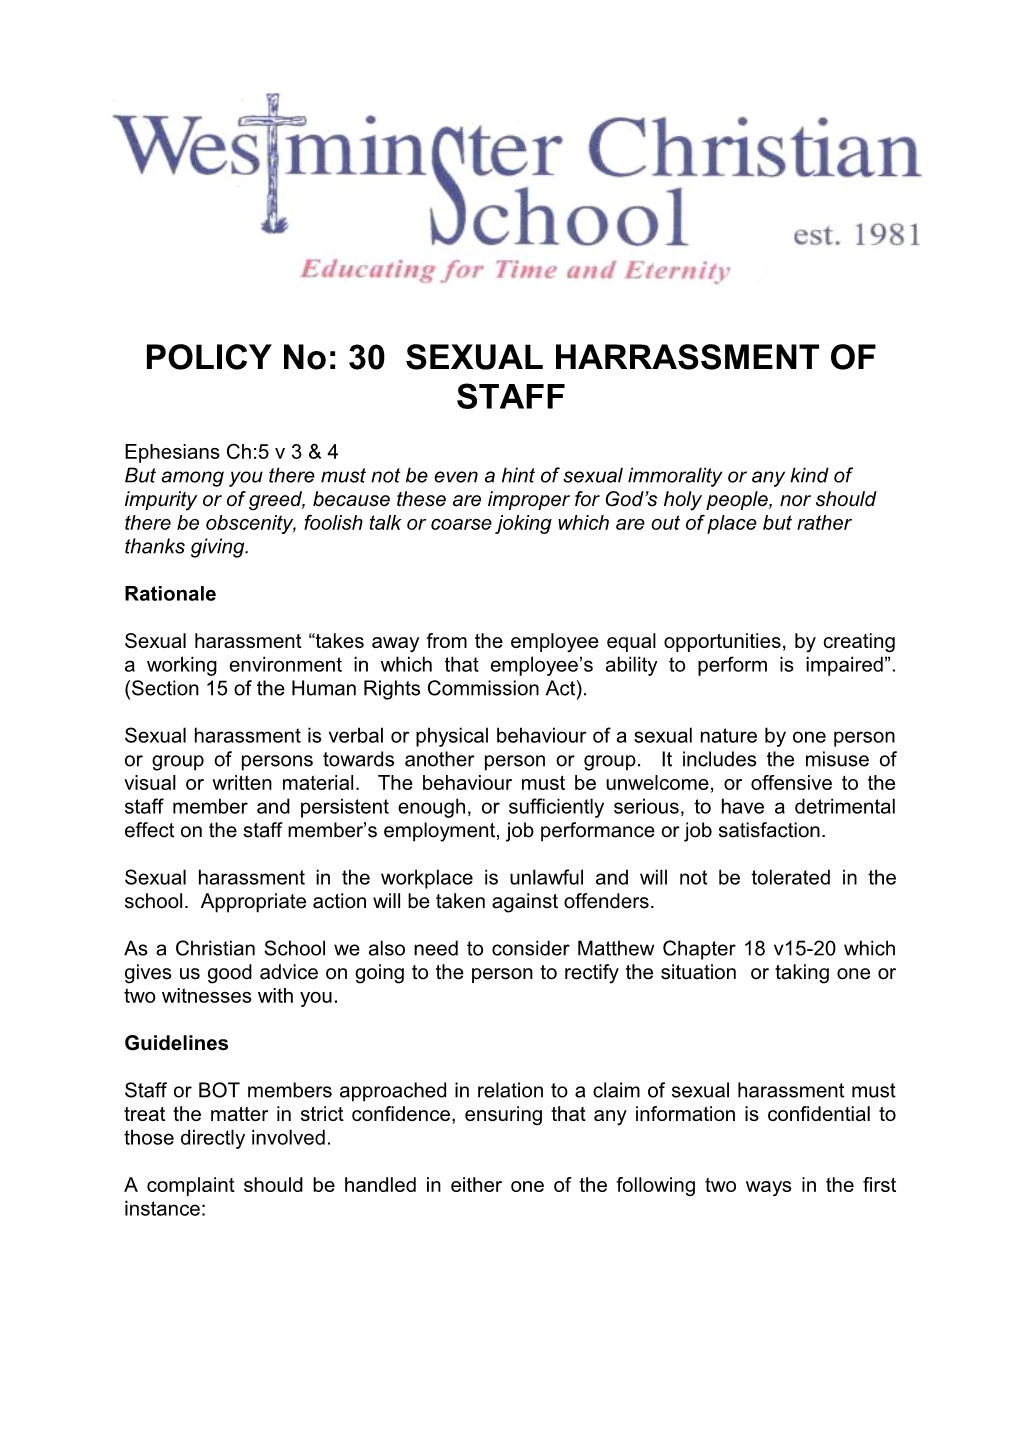 POLICY No: 30 SEXUAL HARRASSMENT of STAFF